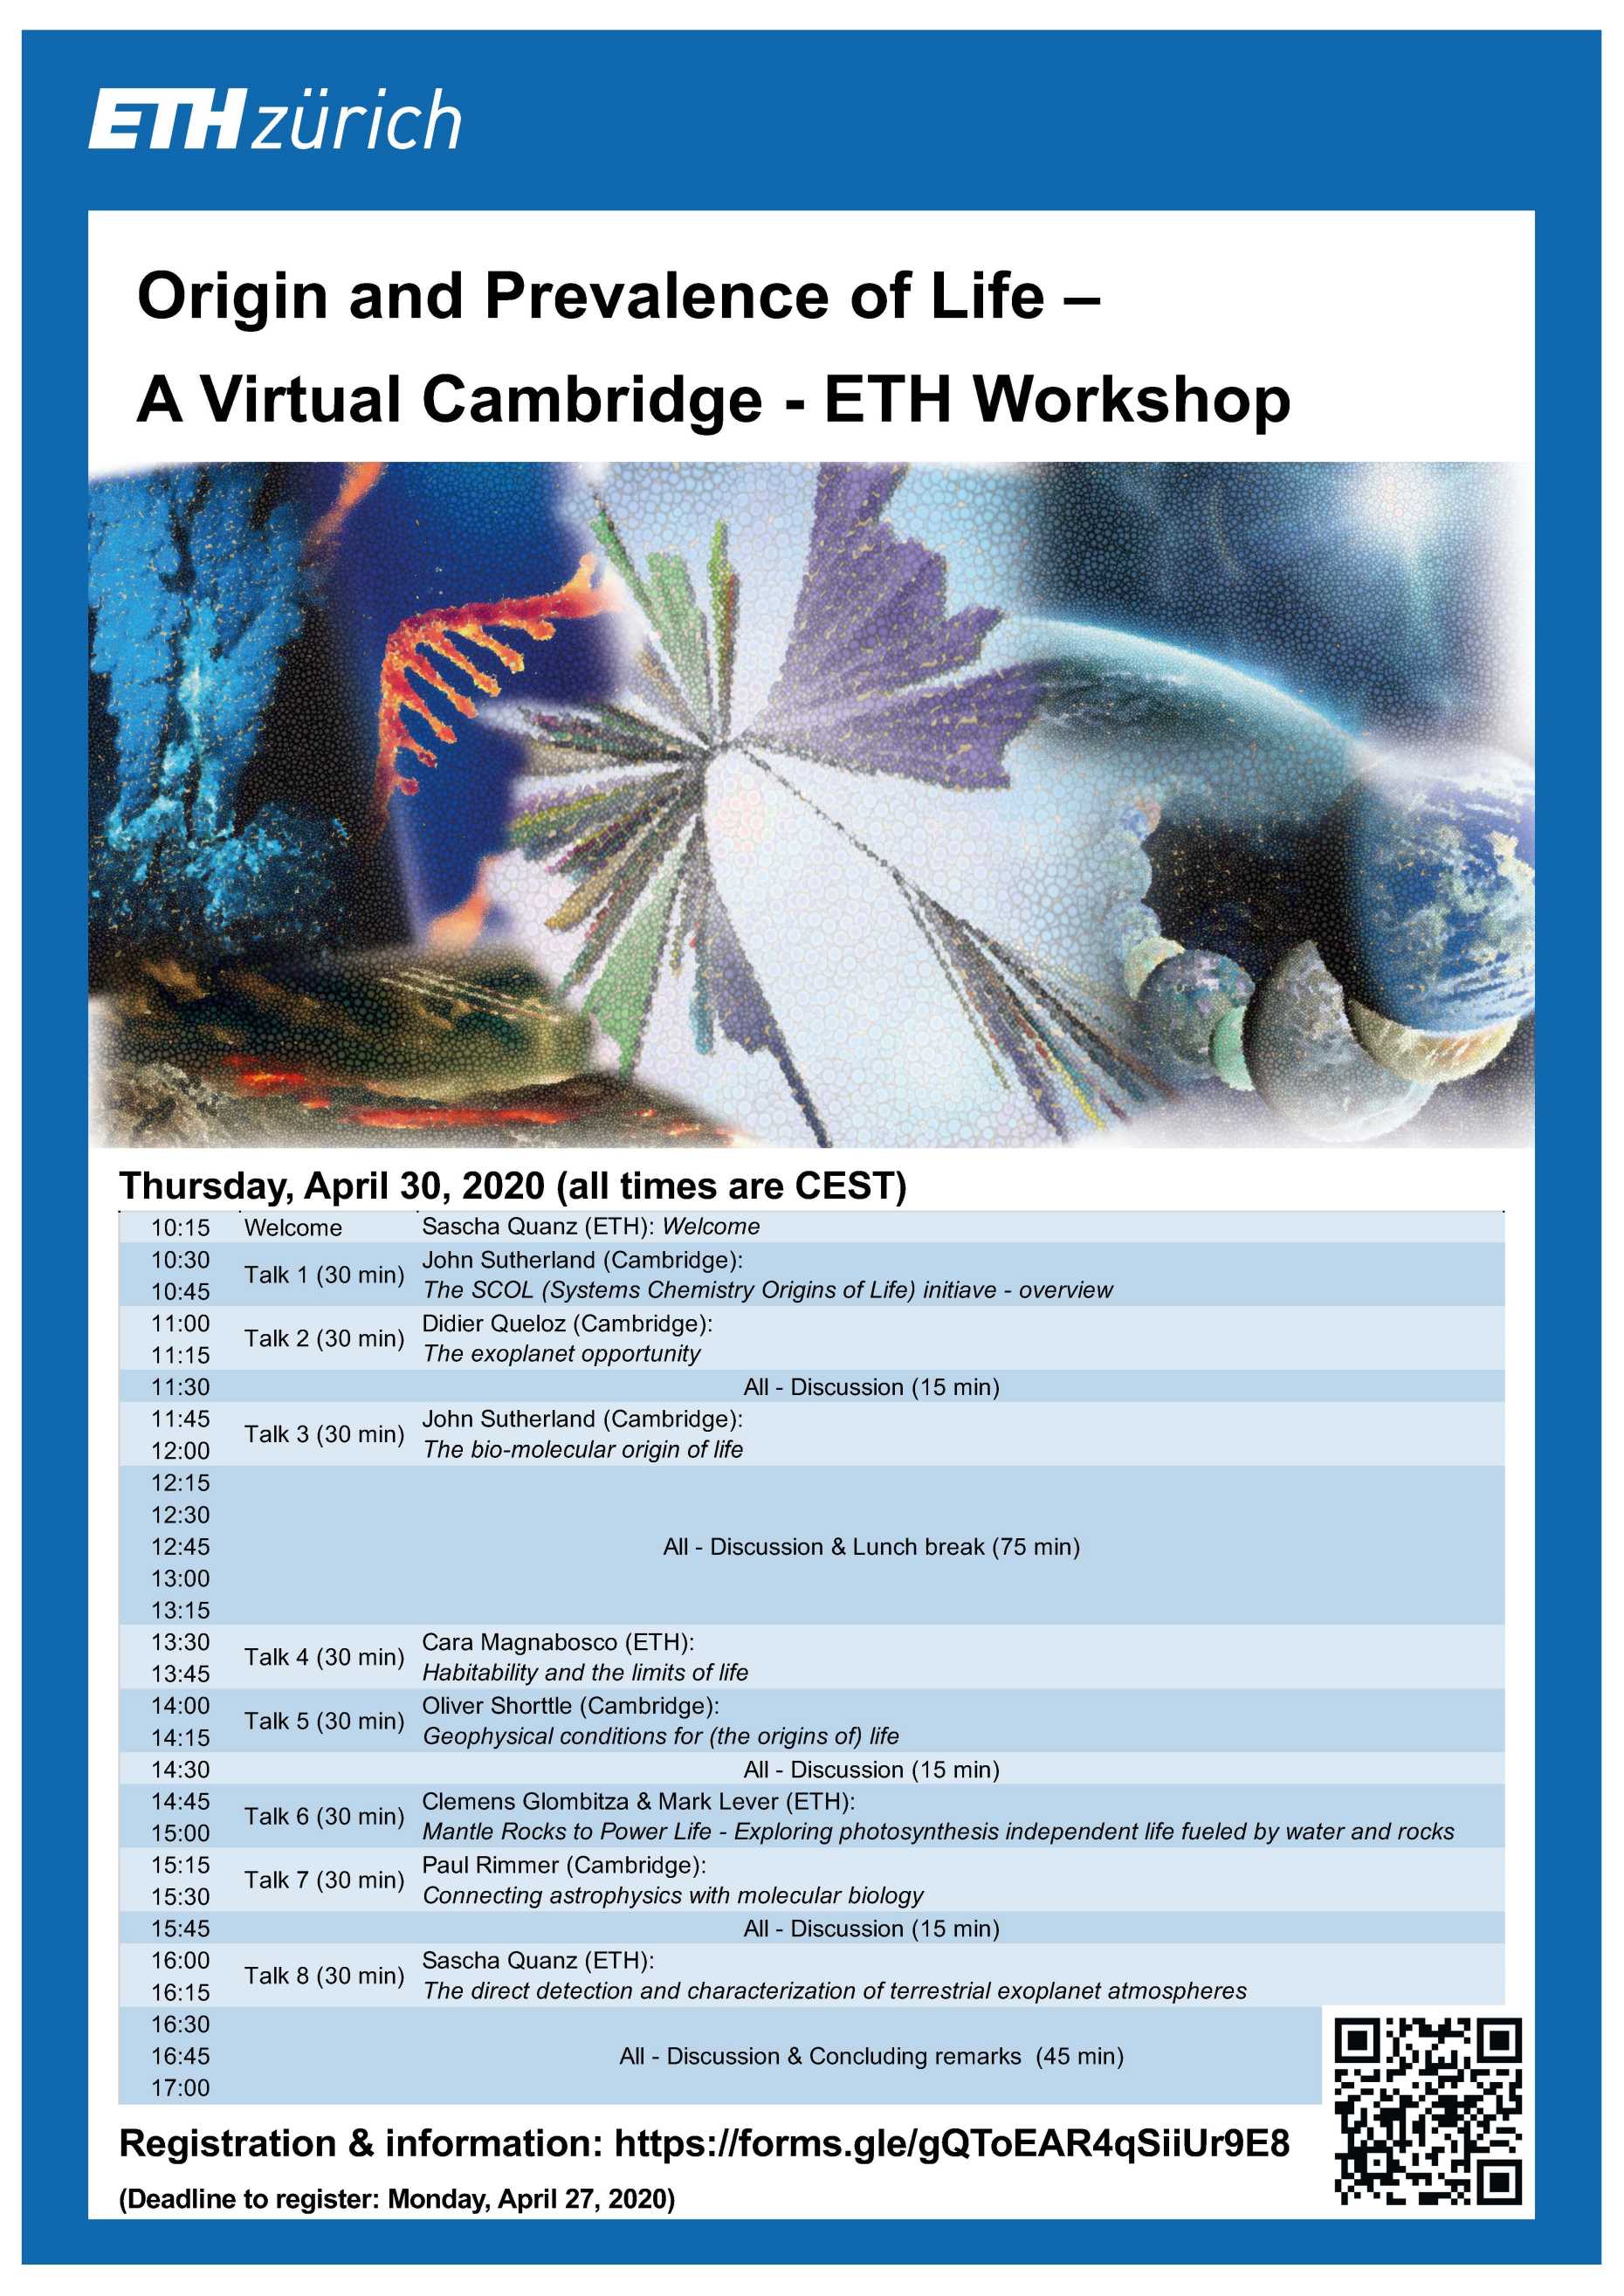 Origin and Prevalence of Life - A Virtual Cambirdge - ETH Workshop